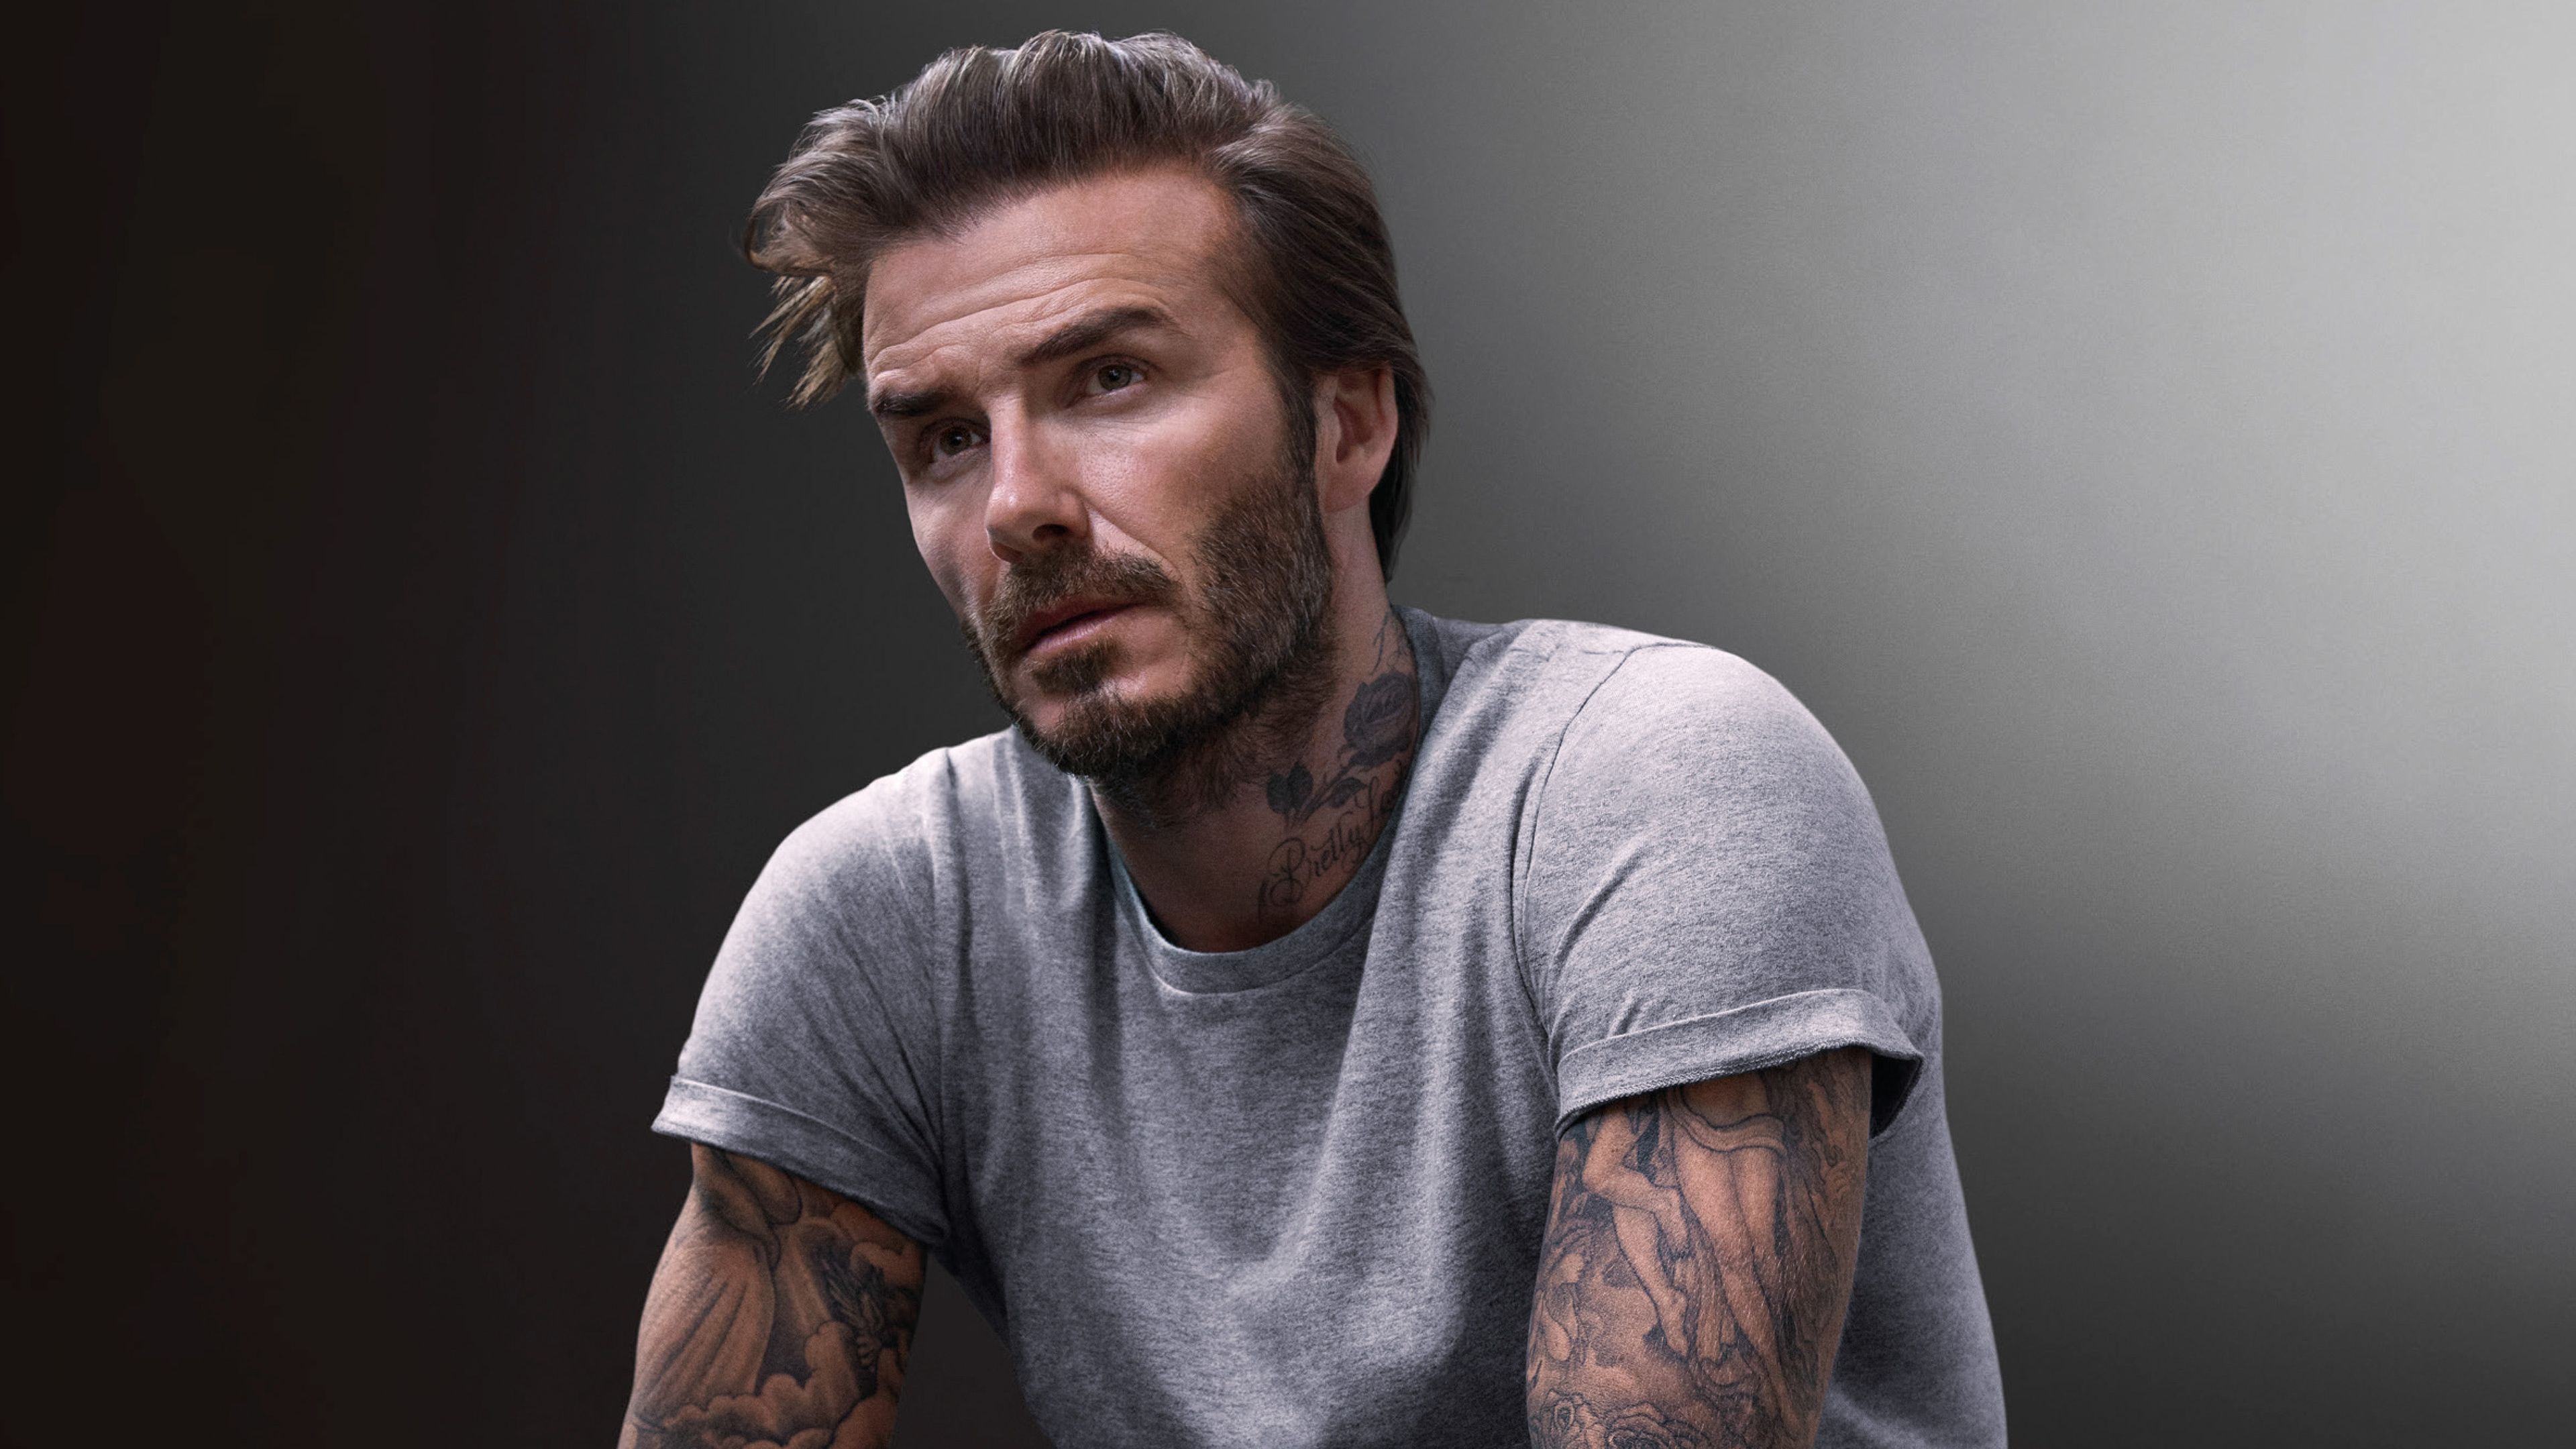 2048x2048 David Beckham 2018 4k Ipad Air HD 4k Wallpapers, Image, Backgrounds, Photos and Pictures